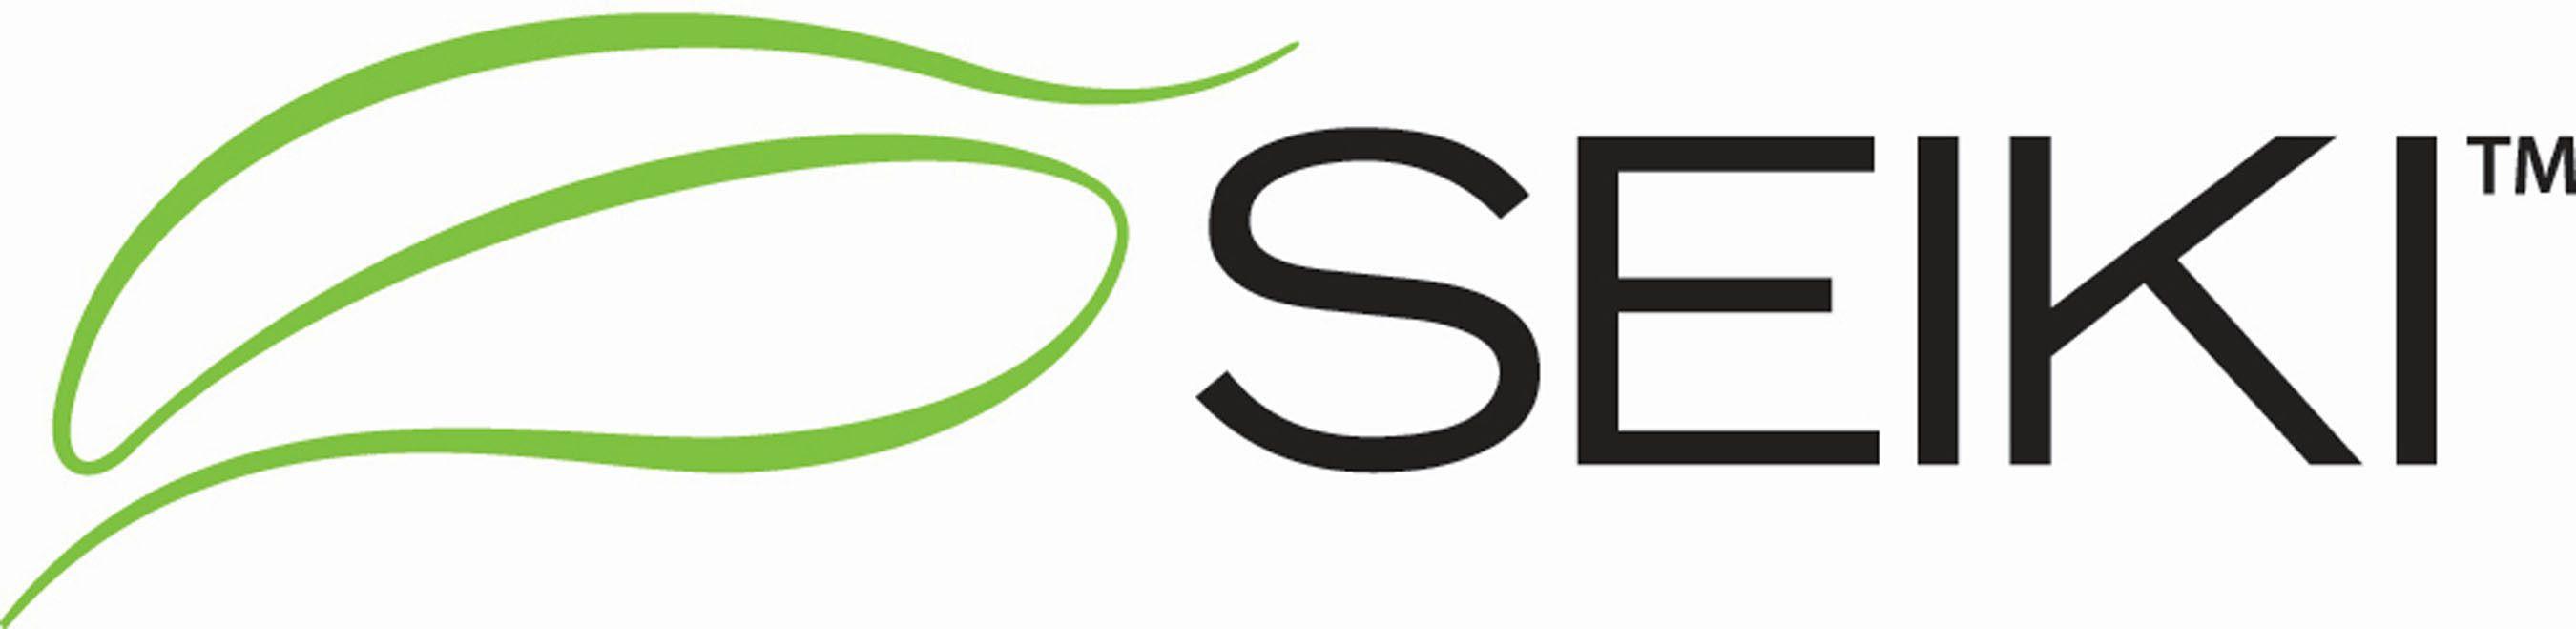 Seiki Logo - Seiki First To Deliver Freeview Connect To The U.K